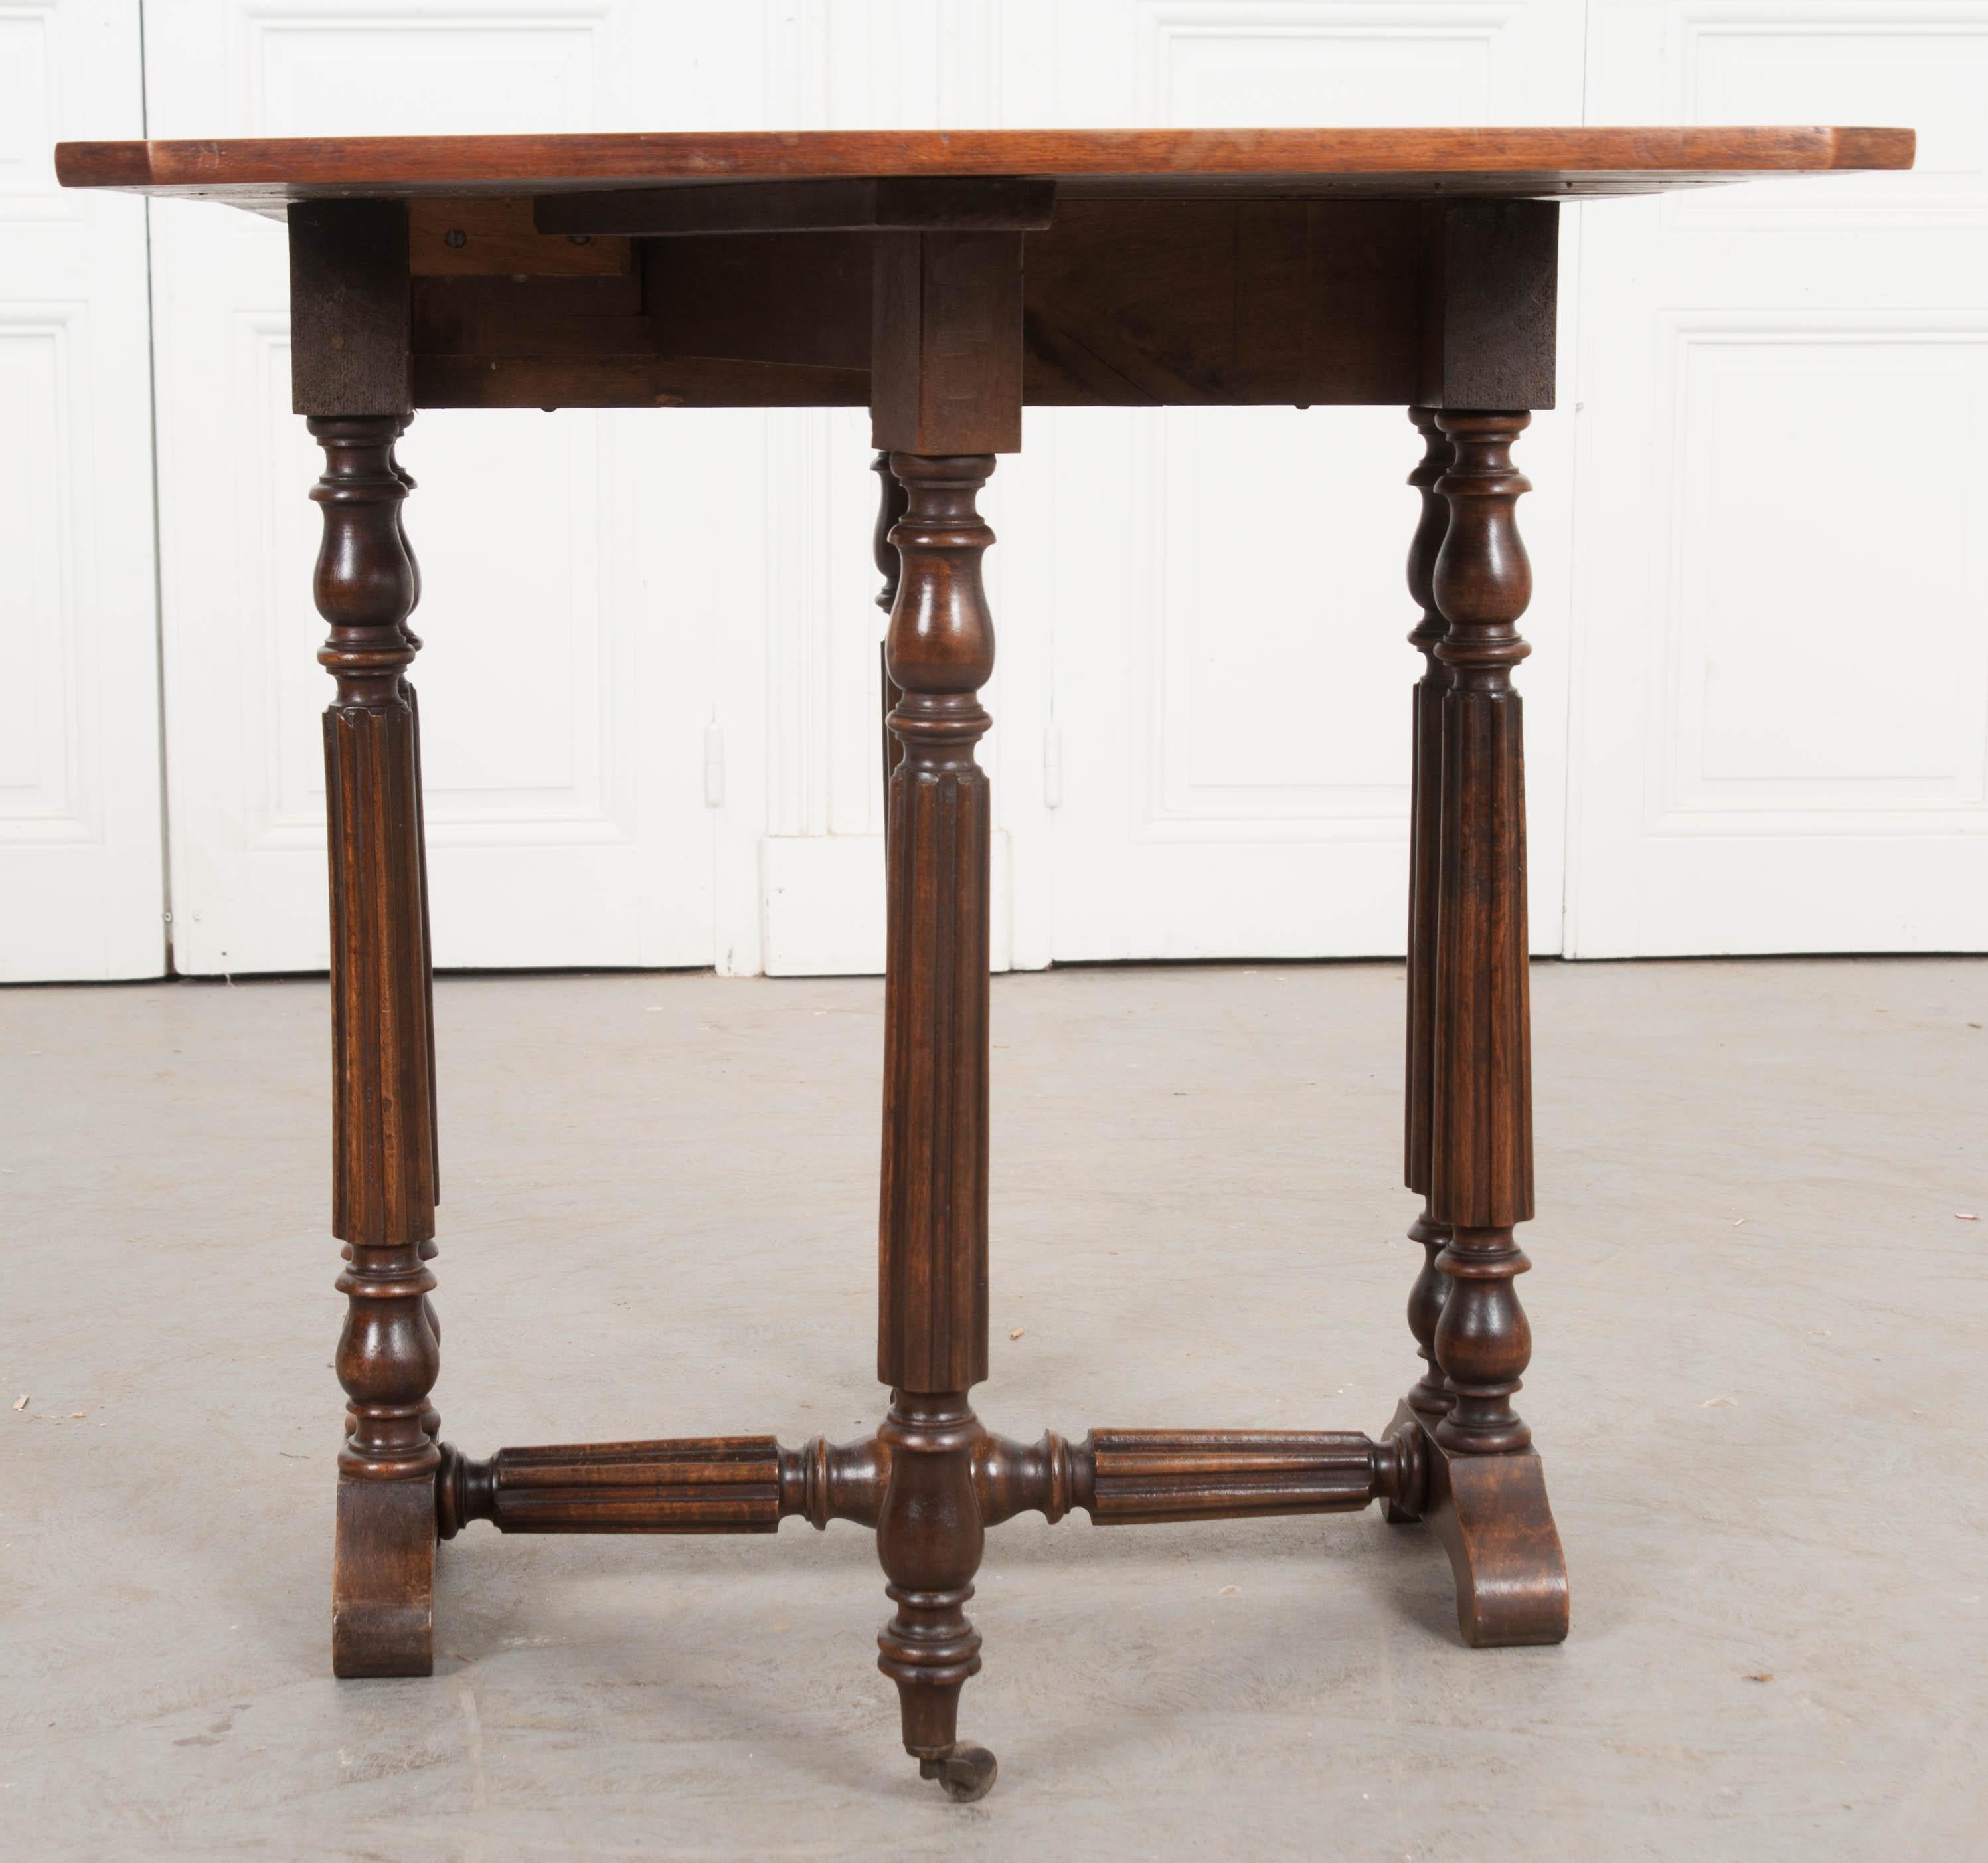 English 19th Century William and Mary-Style Walnut Gate-Leg Table 3